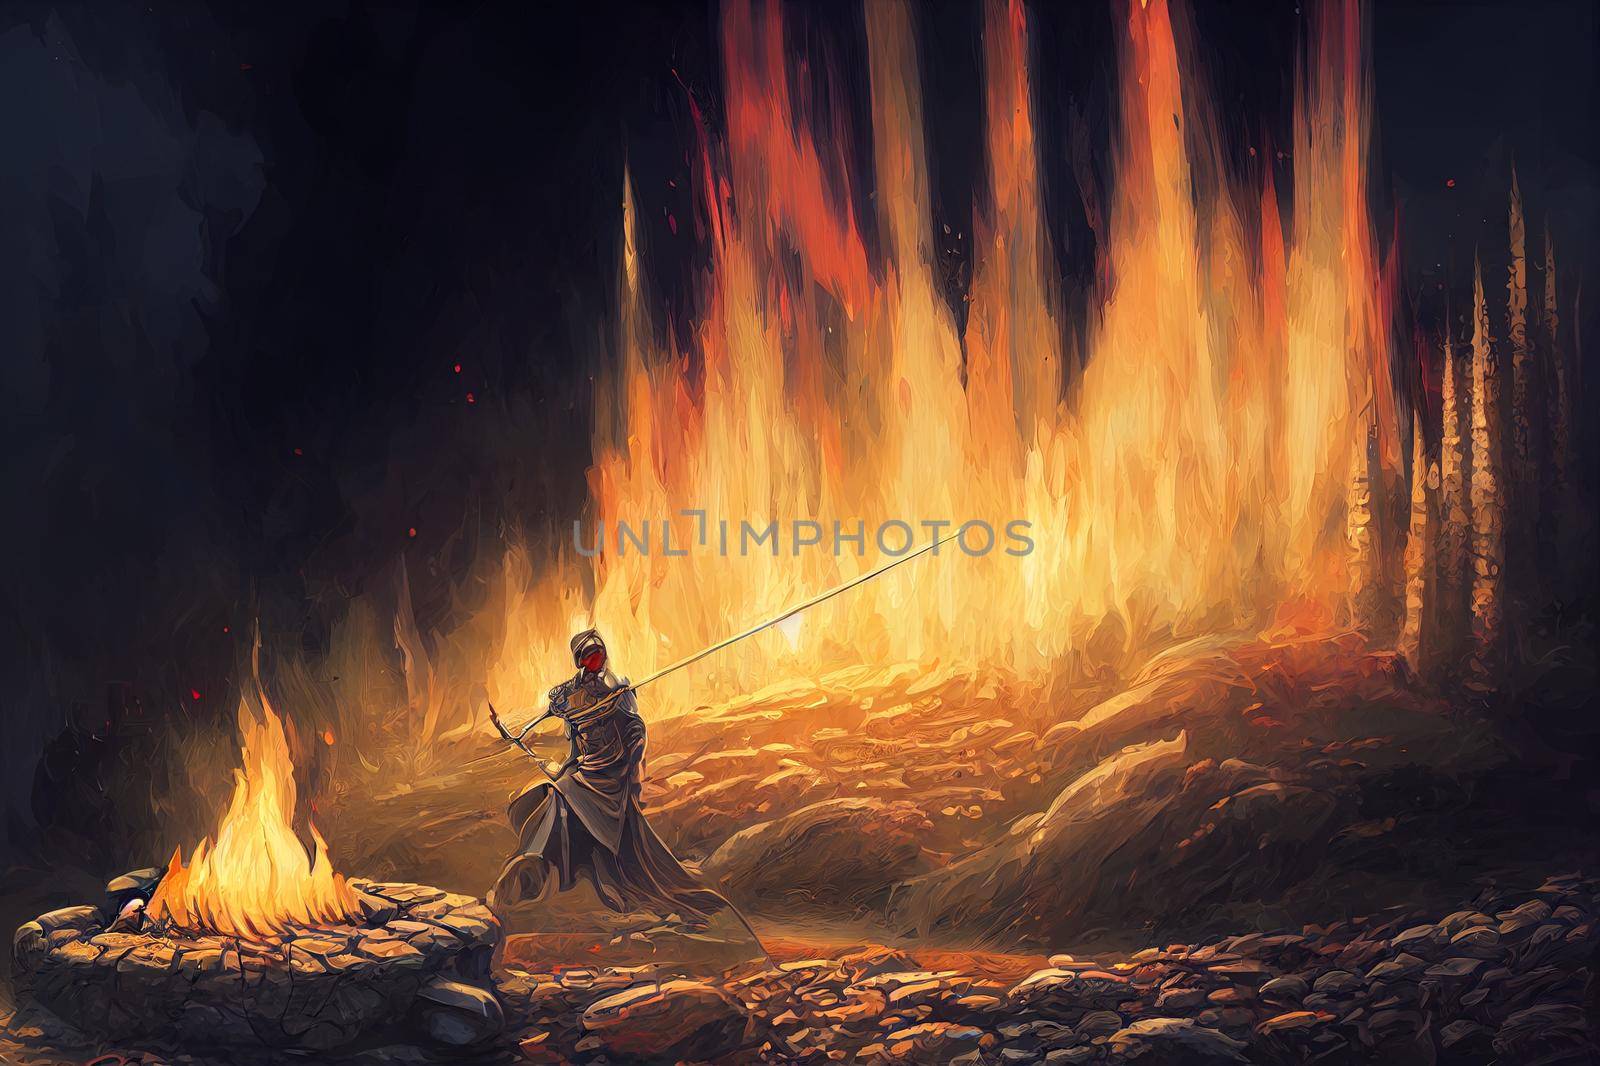 knight with the magic sword sitting on the fire, digital art style, illustration painting